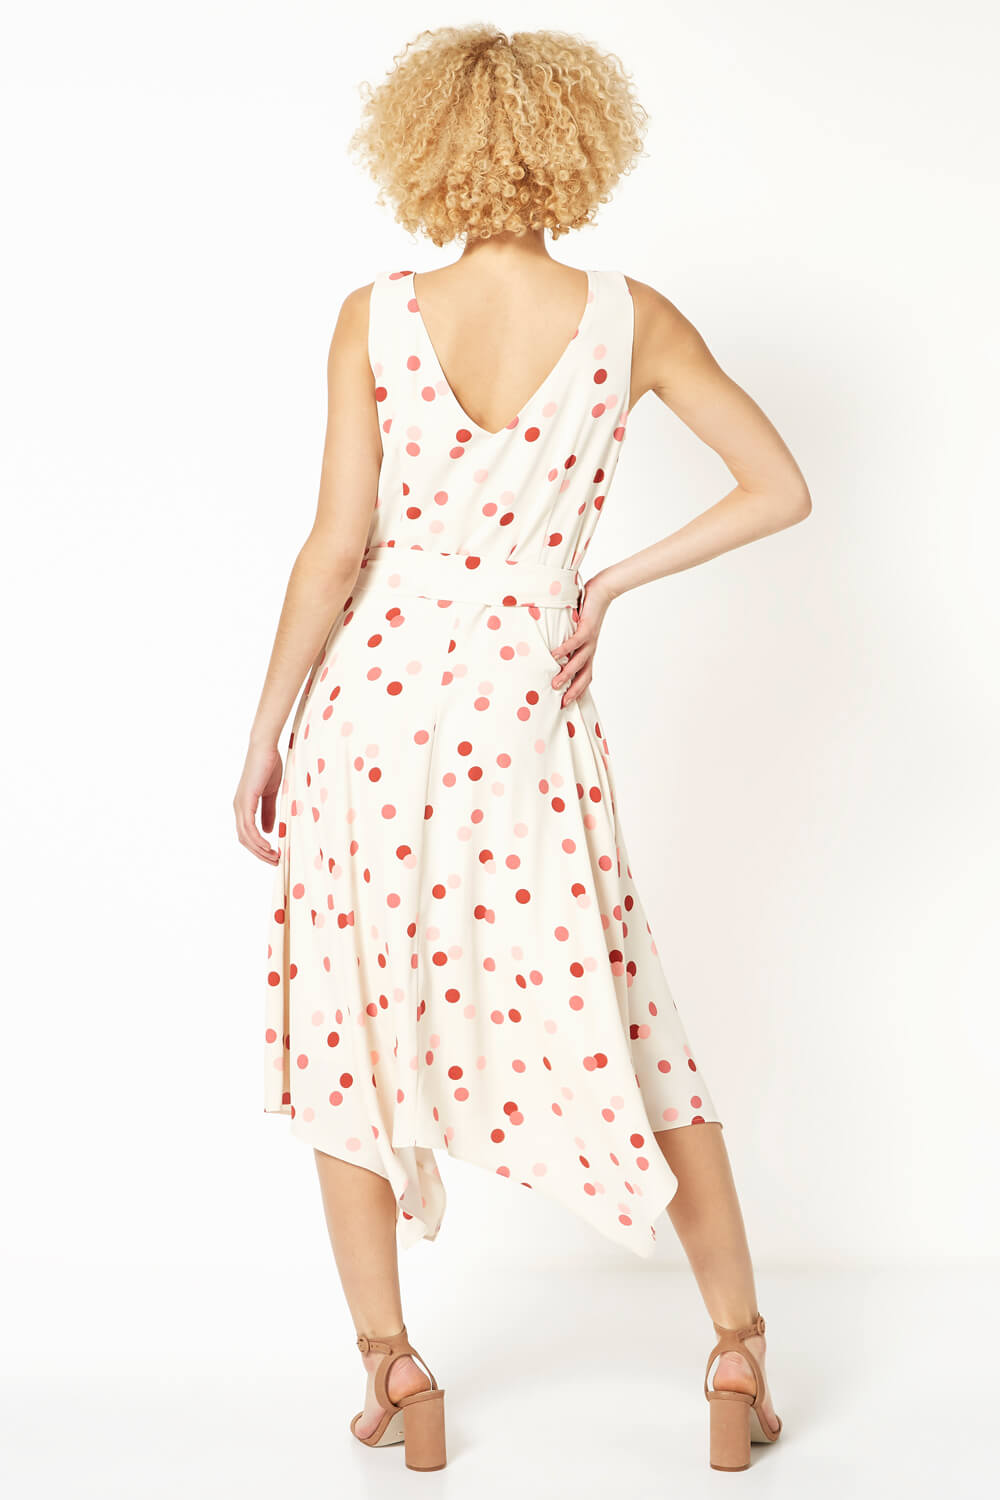 Cream  Polka Dot Fit and Flare Belted Dress, Image 2 of 4